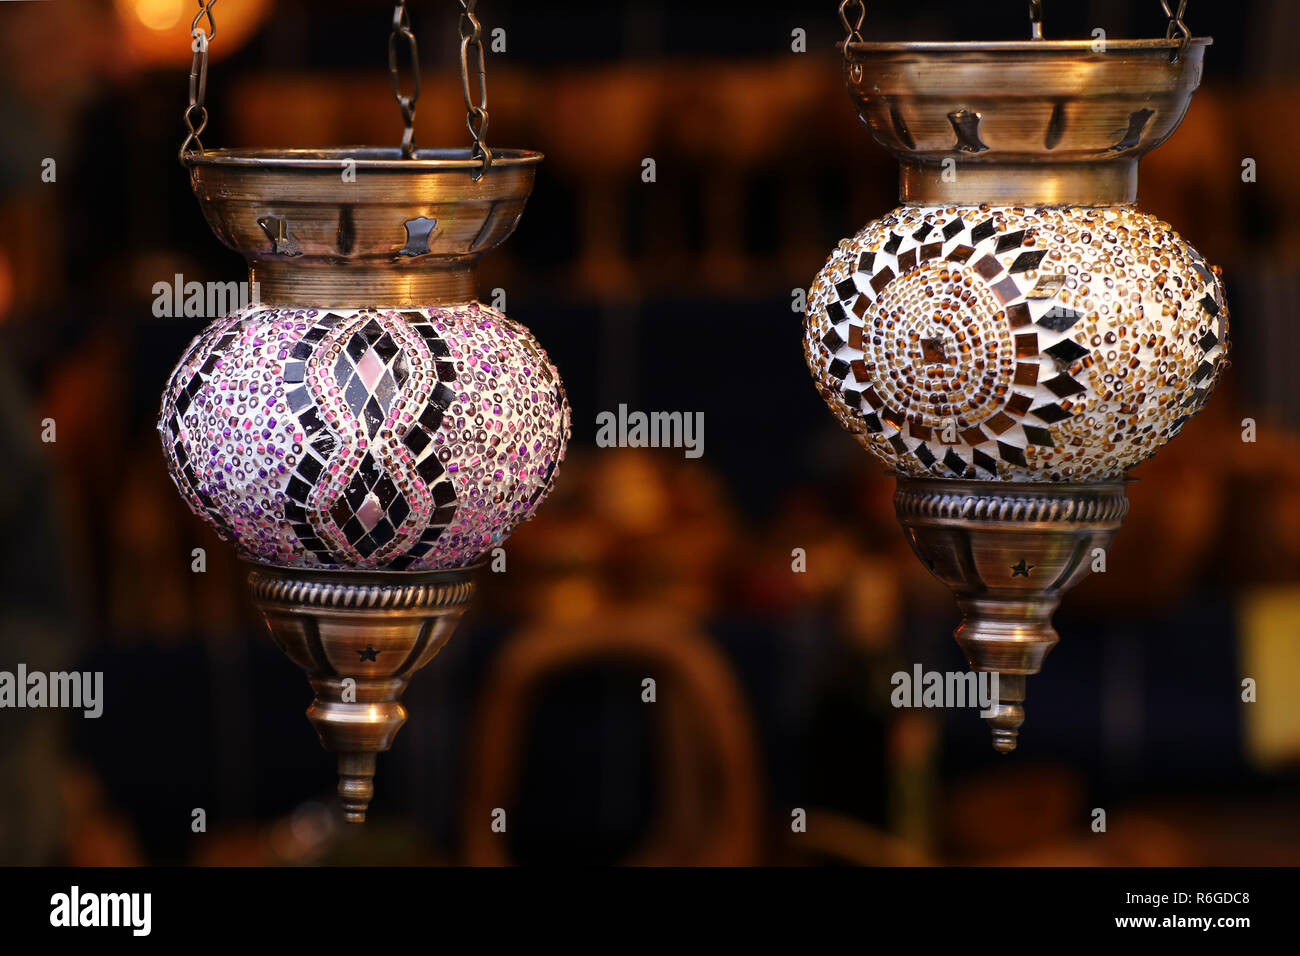 oriental or moroccan lamps Stock Photo